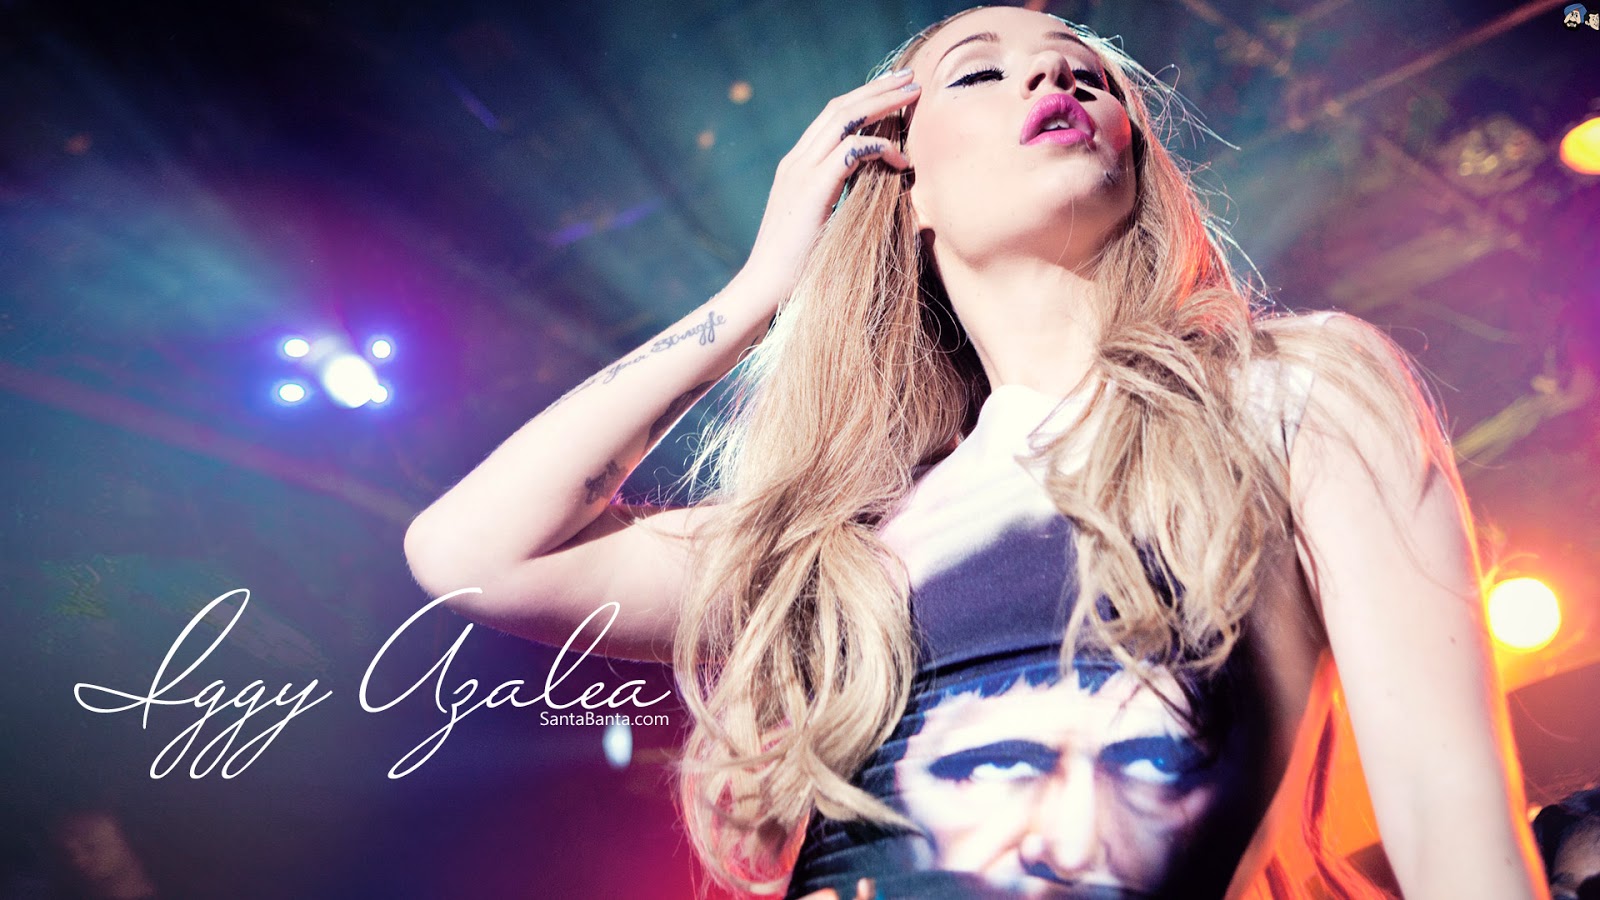 Iggy Azalea HD Wallpapers | Most beautiful places in the world | Download Free Wallpapers1600 x 900